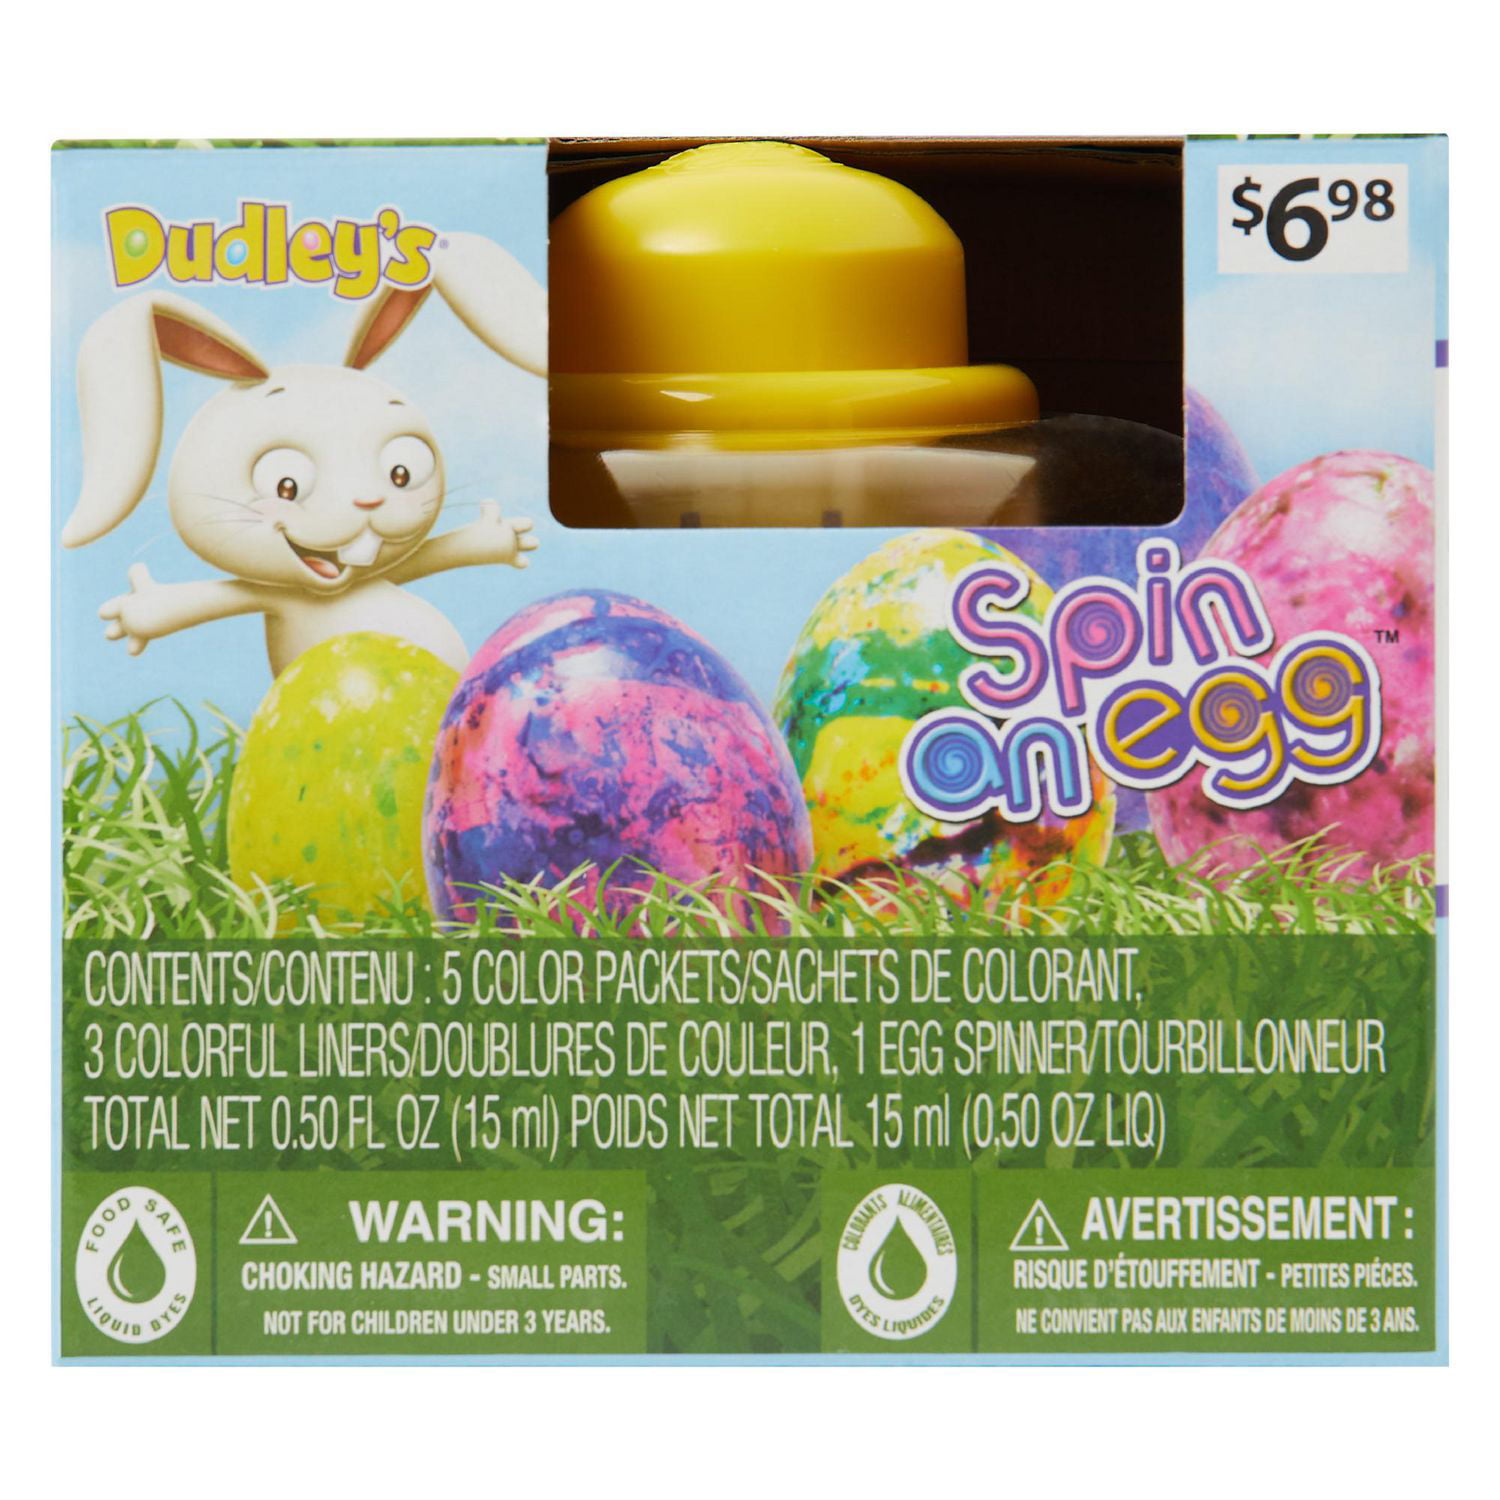 DUDLEY'S SPIN AN EGG DECORATING KIT 